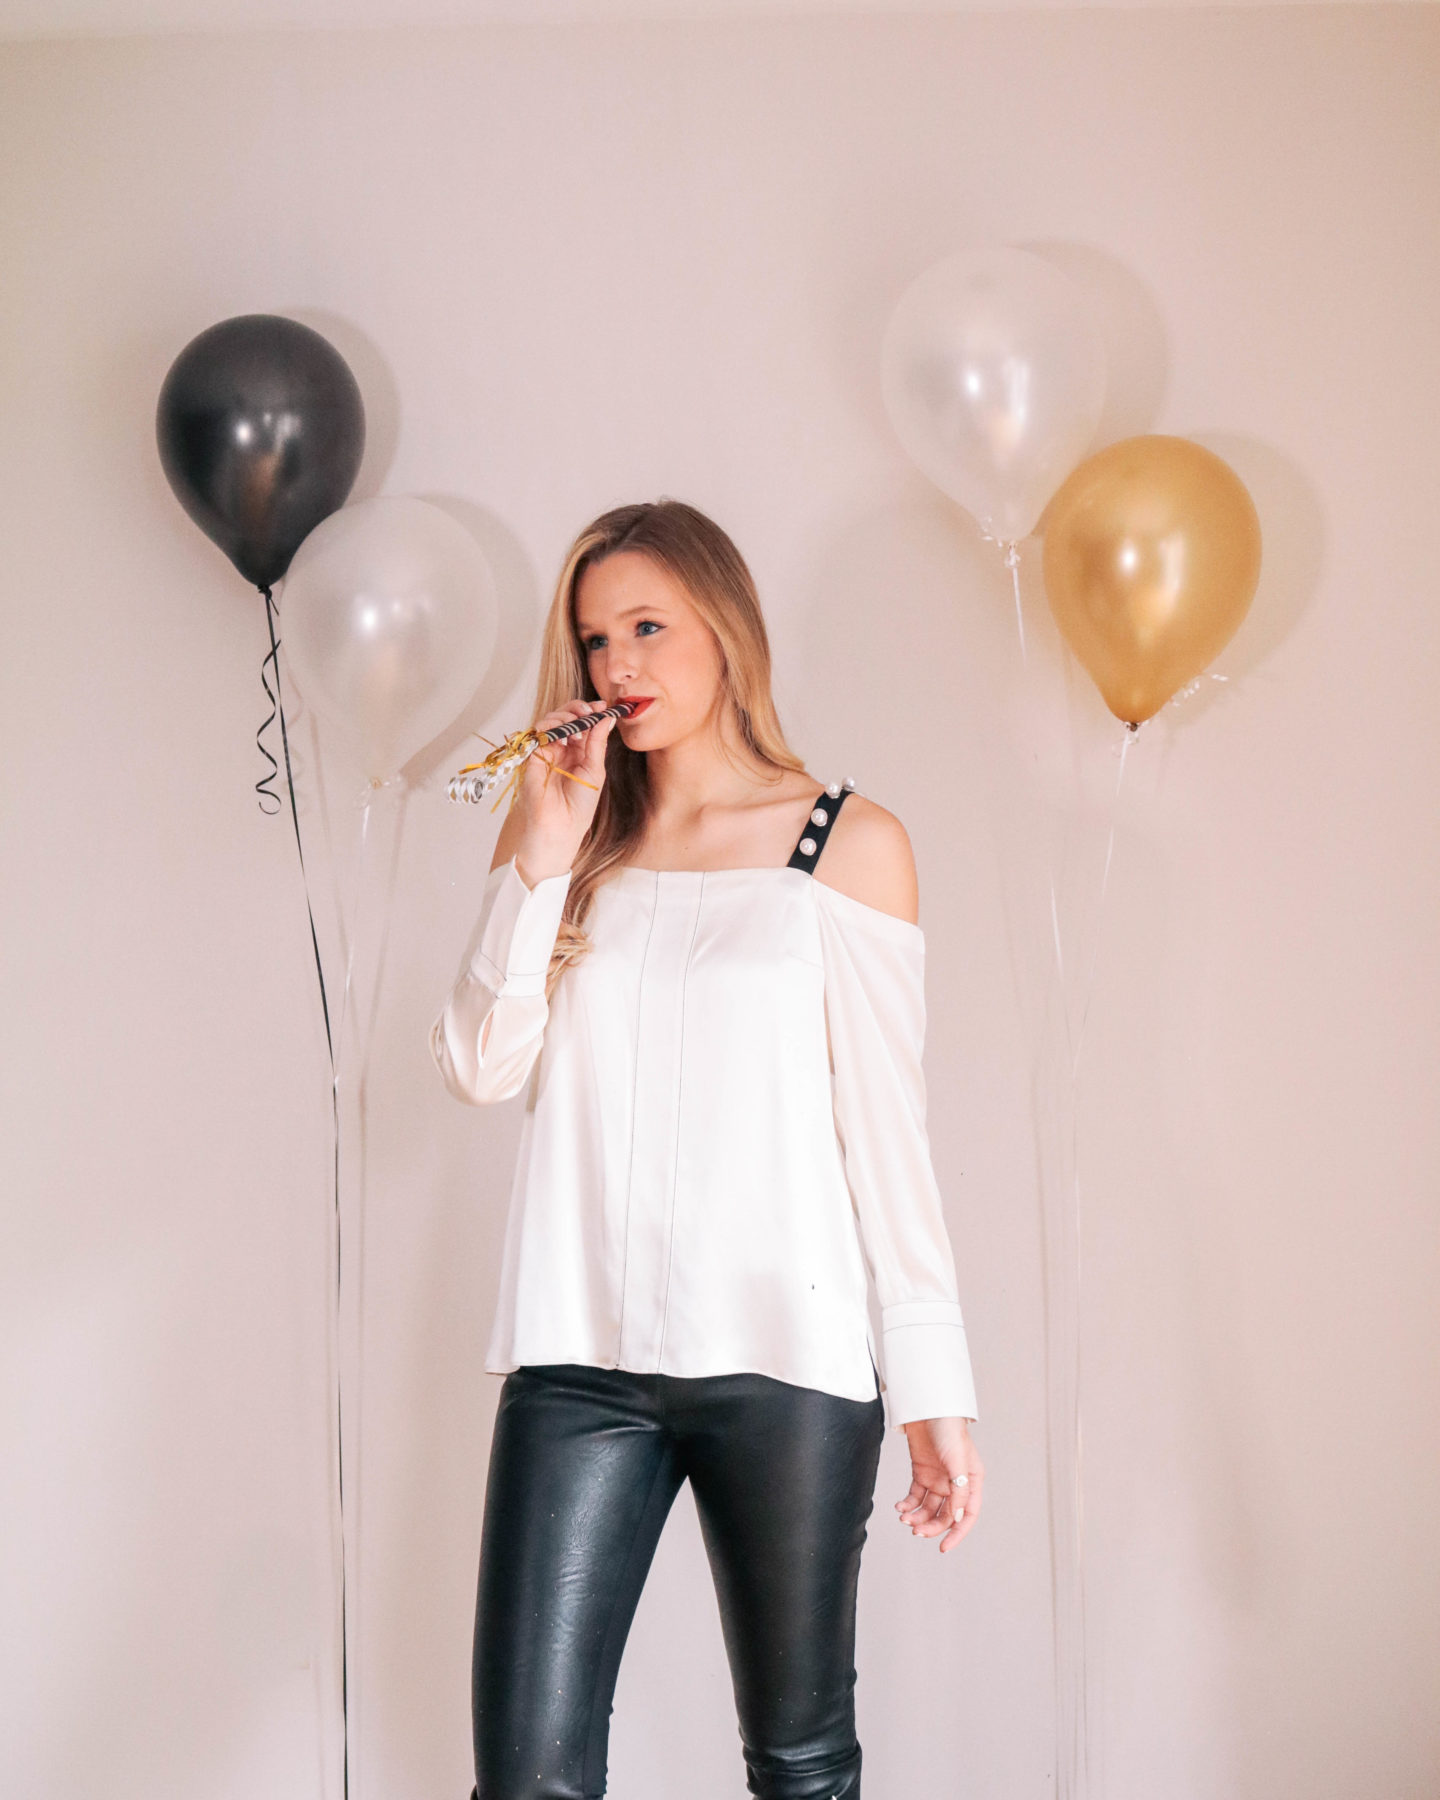 Fashion blogger, Leigha Gardner, of The Lilac Press sharing some designer looks for NYE including this embellished 3.1 Phillip Lim top and Stella McCartney faux leather leggings.